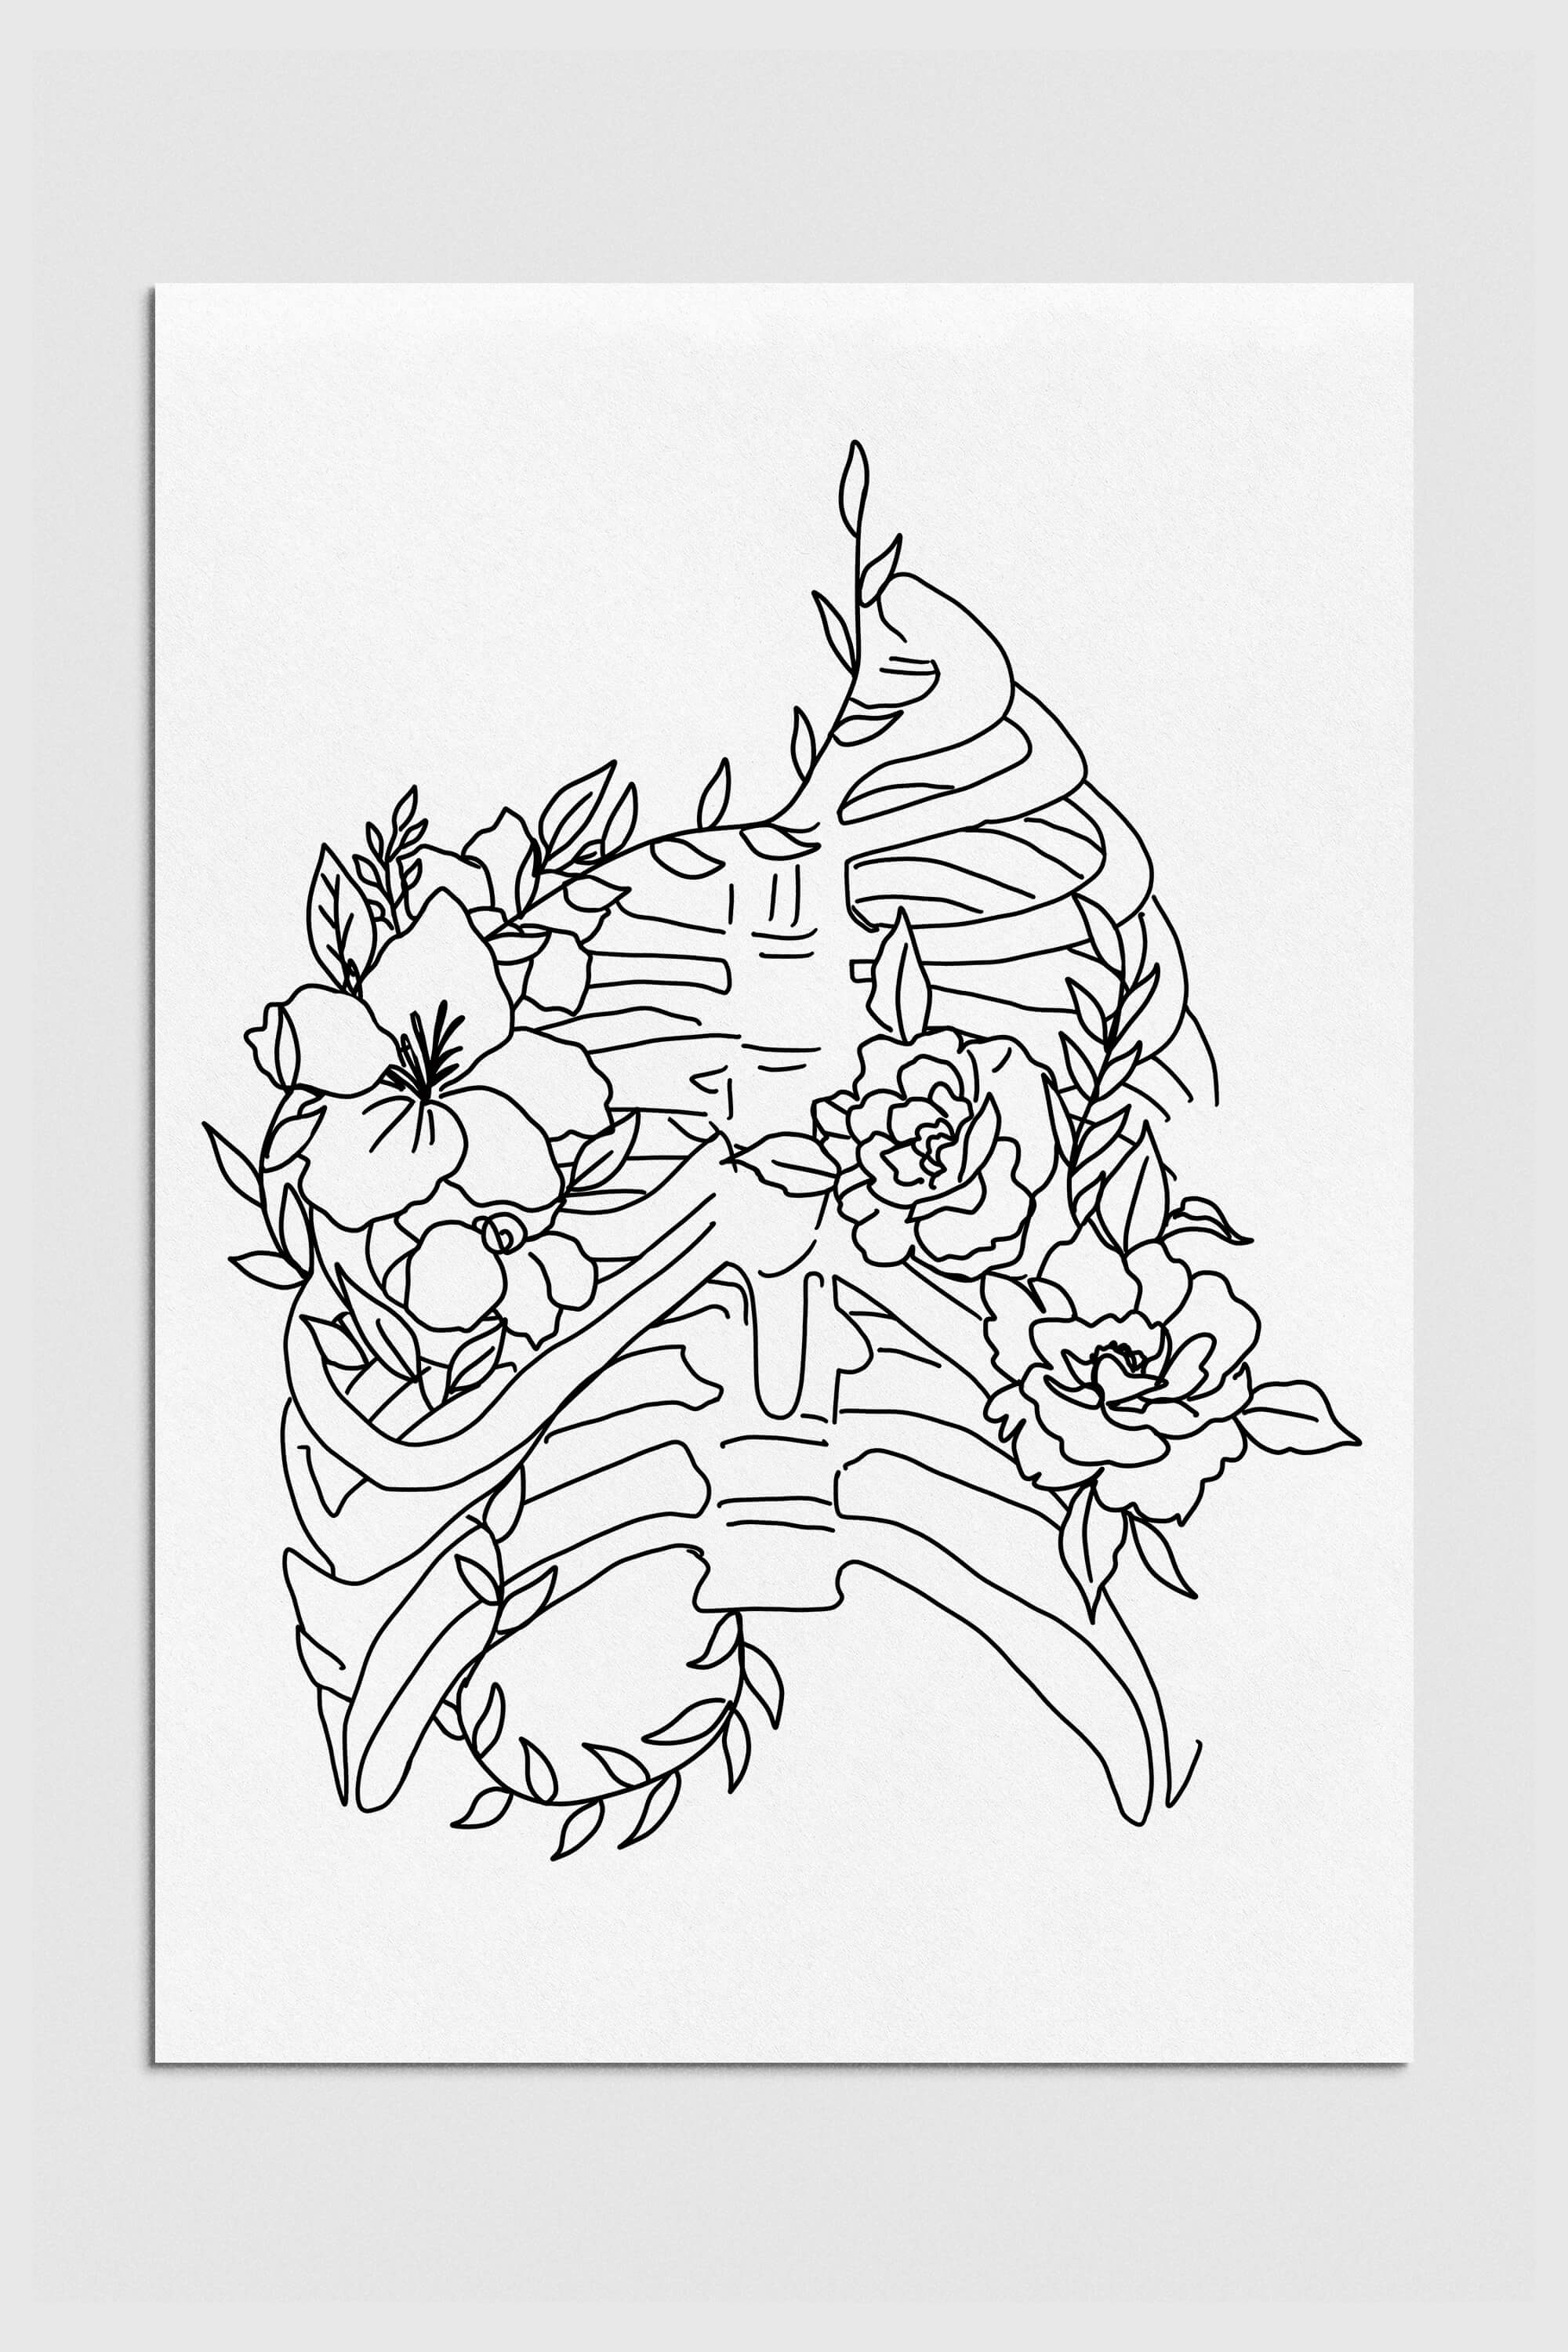 Elegant monochrome floral anatomy art print designed for therapy offices. Delicate skeletal beauty entwined with blooming flowers on canvas. Perfect for creating a calming and harmonious atmosphere.